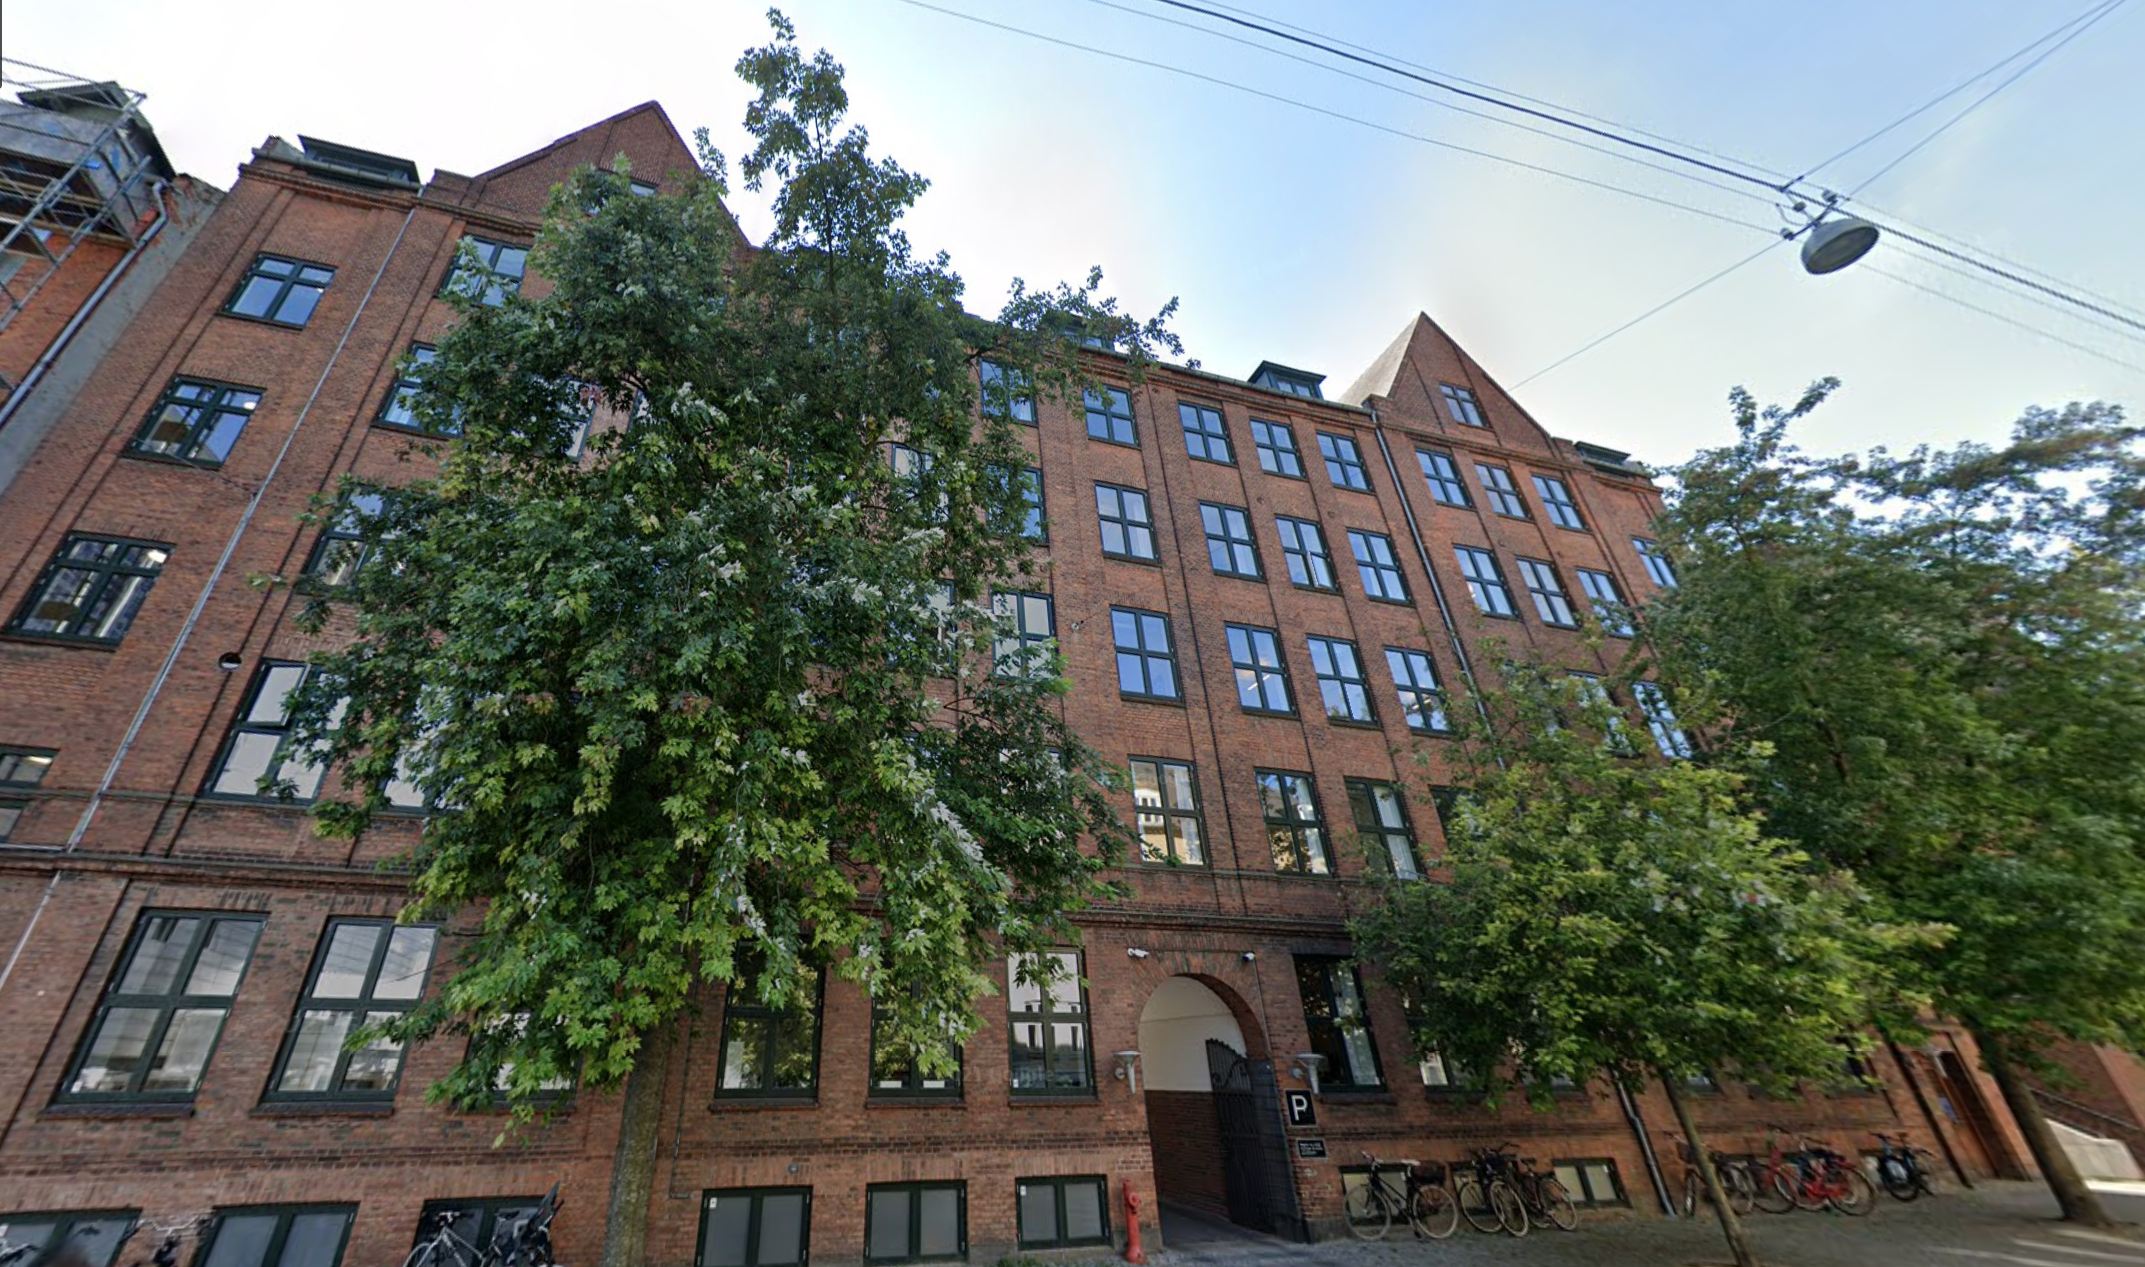 Red brick building with trees in front